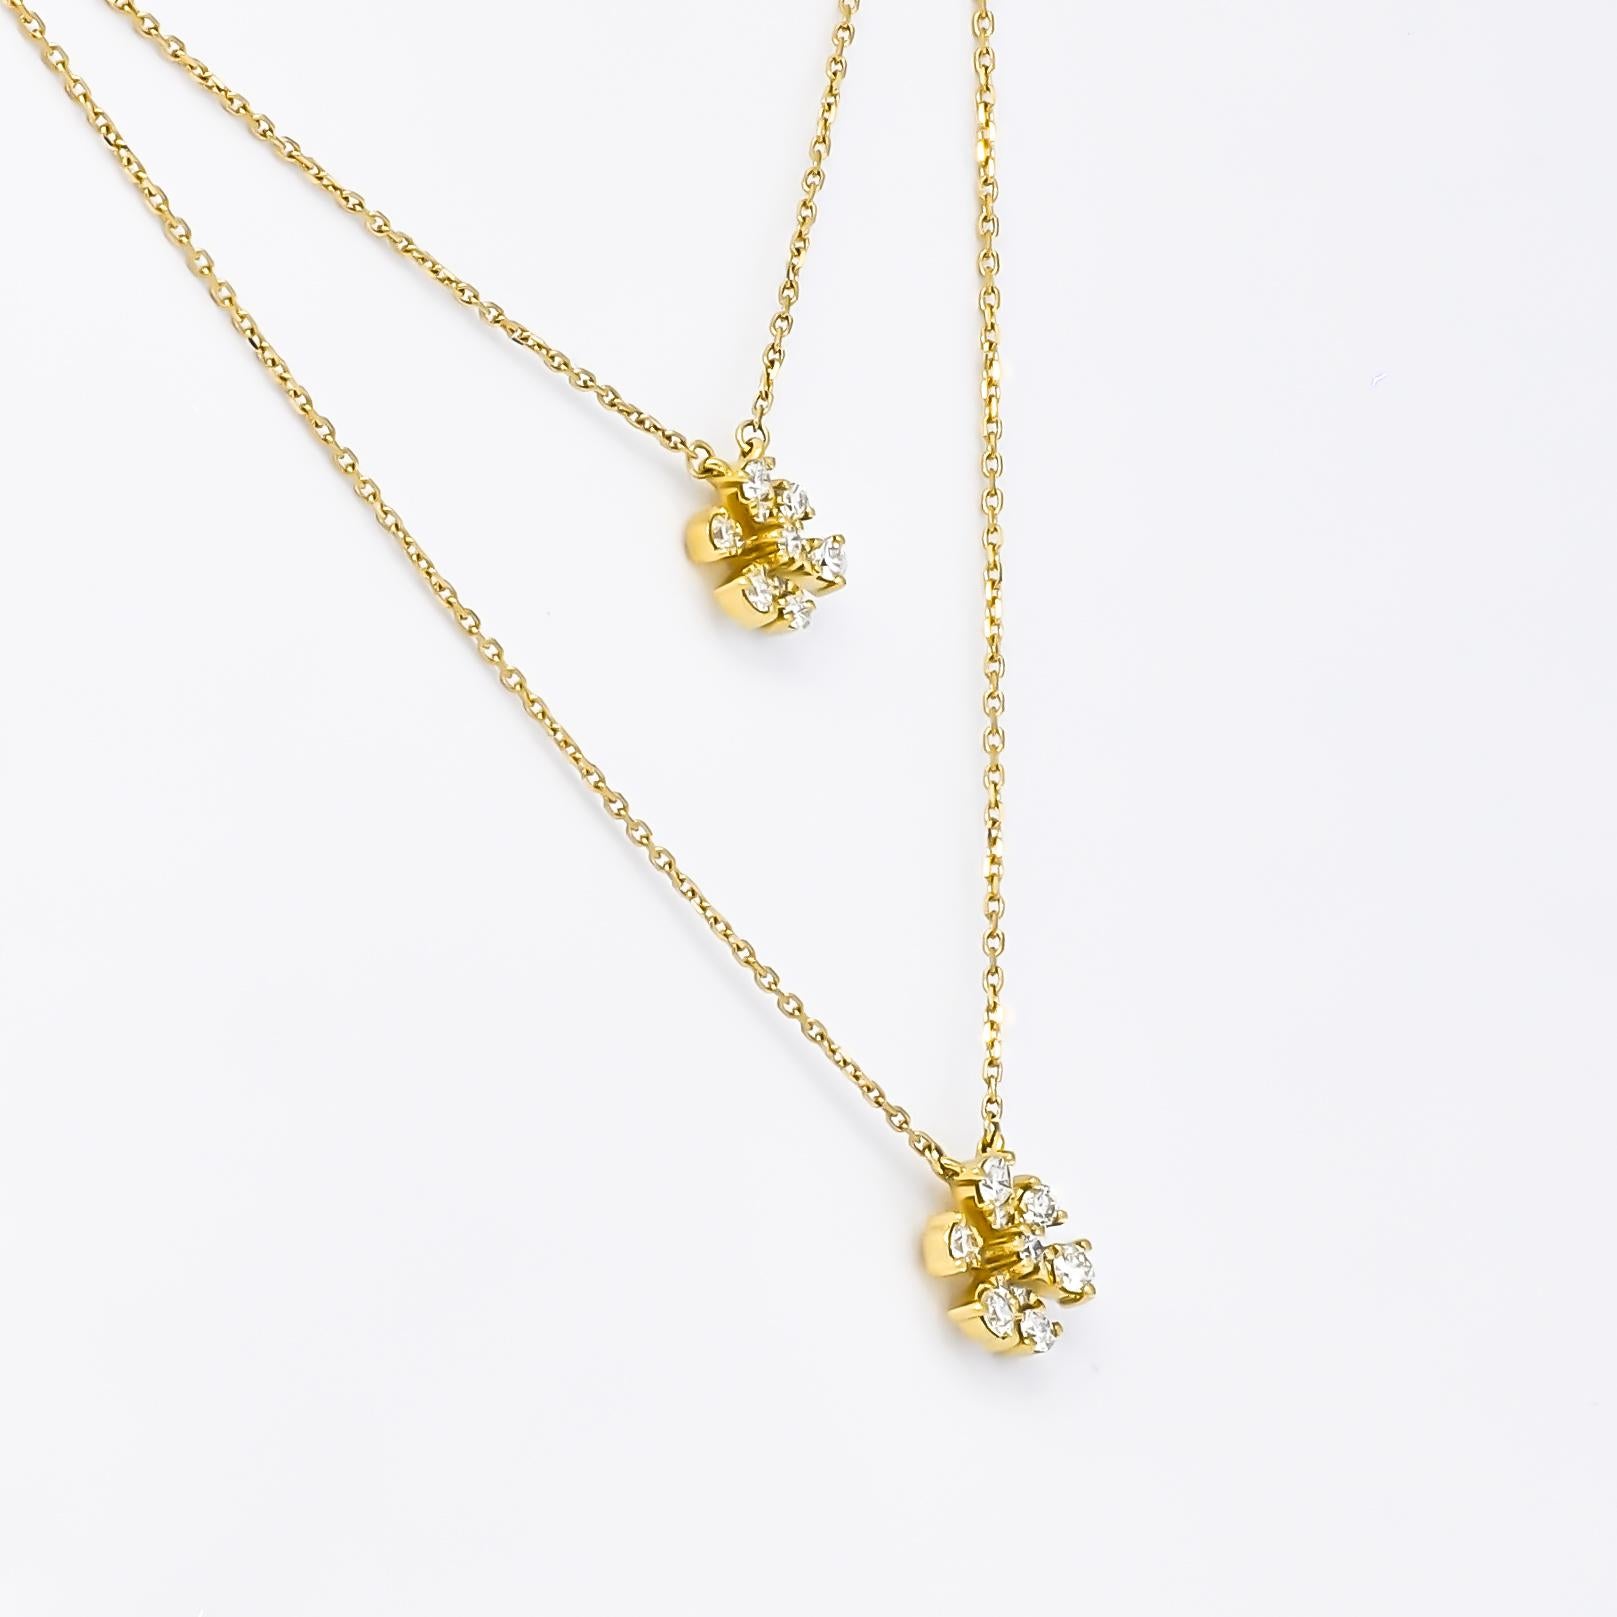 The necklace features a double-layer chain design that adds depth and dimension to its overall aesthetic. Each layer gracefully cascades along the neckline, creating a captivating visual effect that draws attention. The delicate chains are